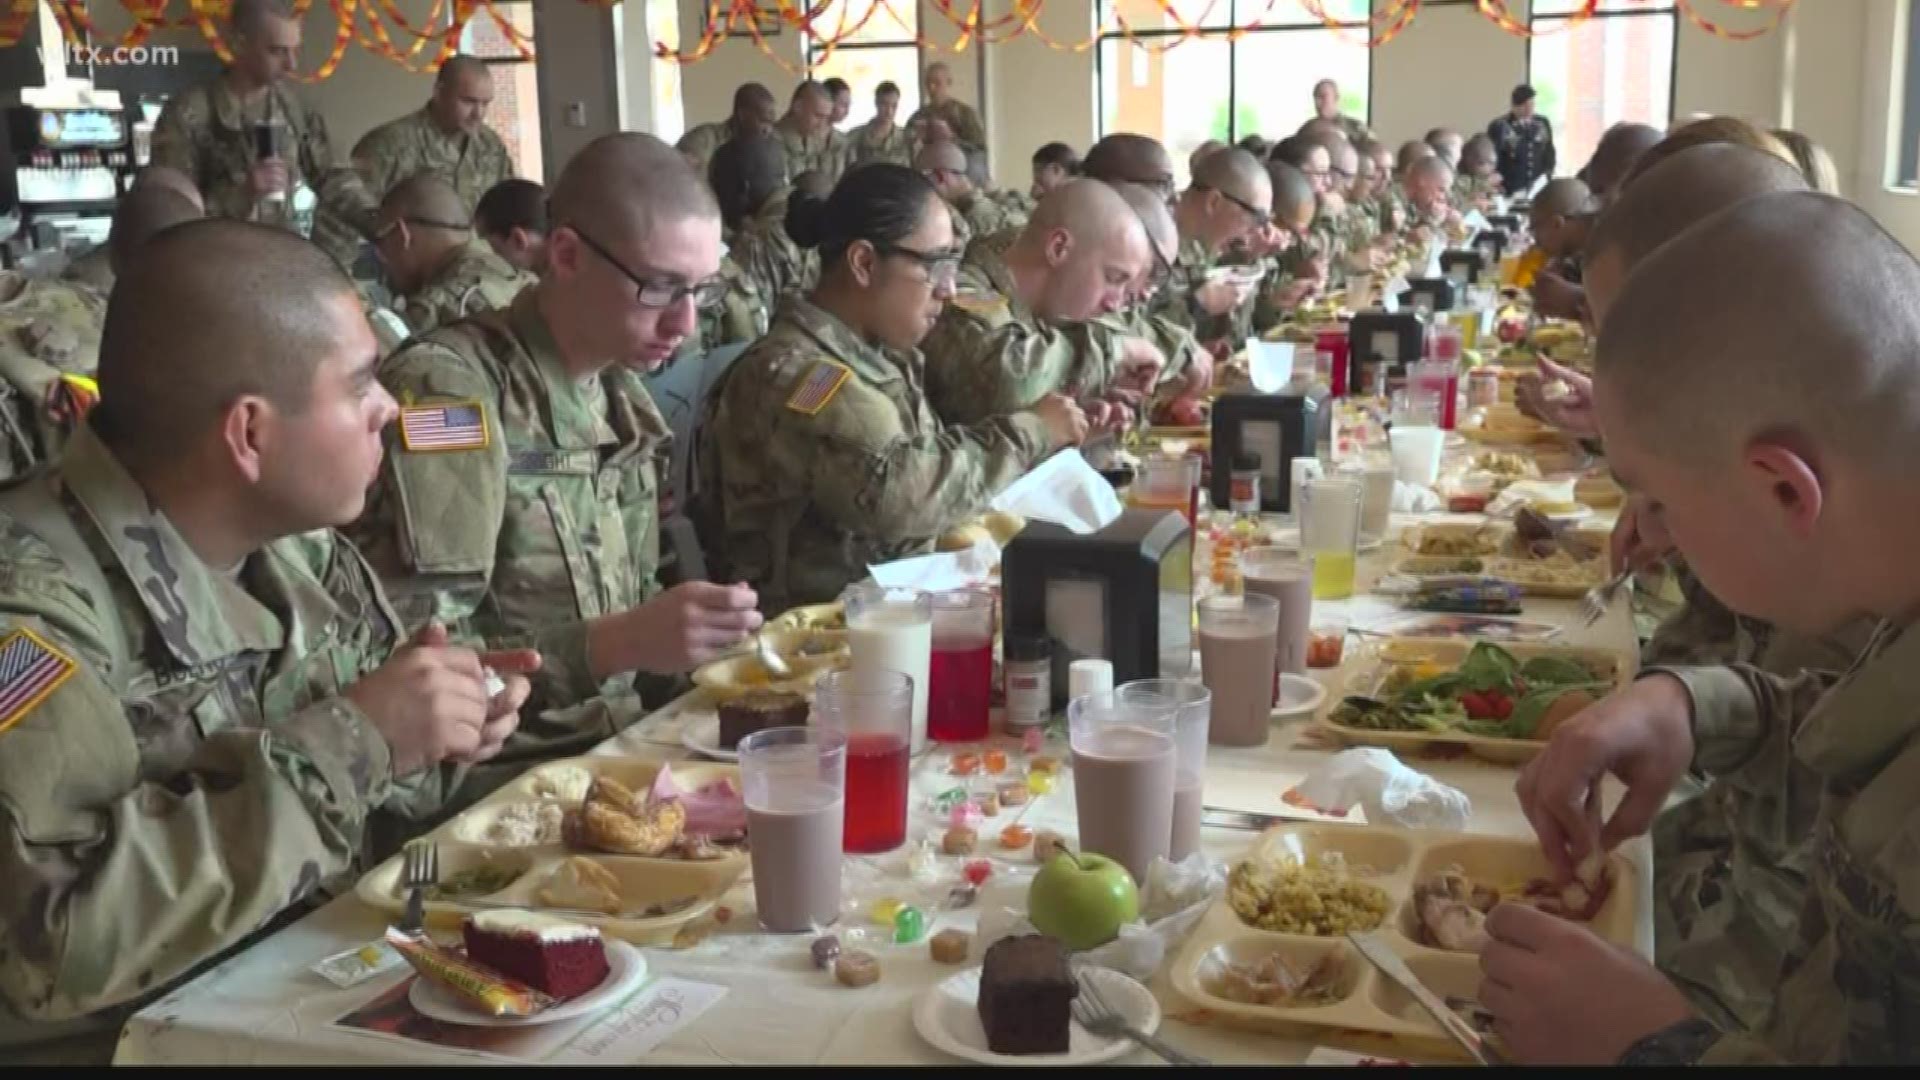 Following tradition the meal is served by commanders, their staffs and senior non-commissioned officers of each company as their soldiers pass through the line.